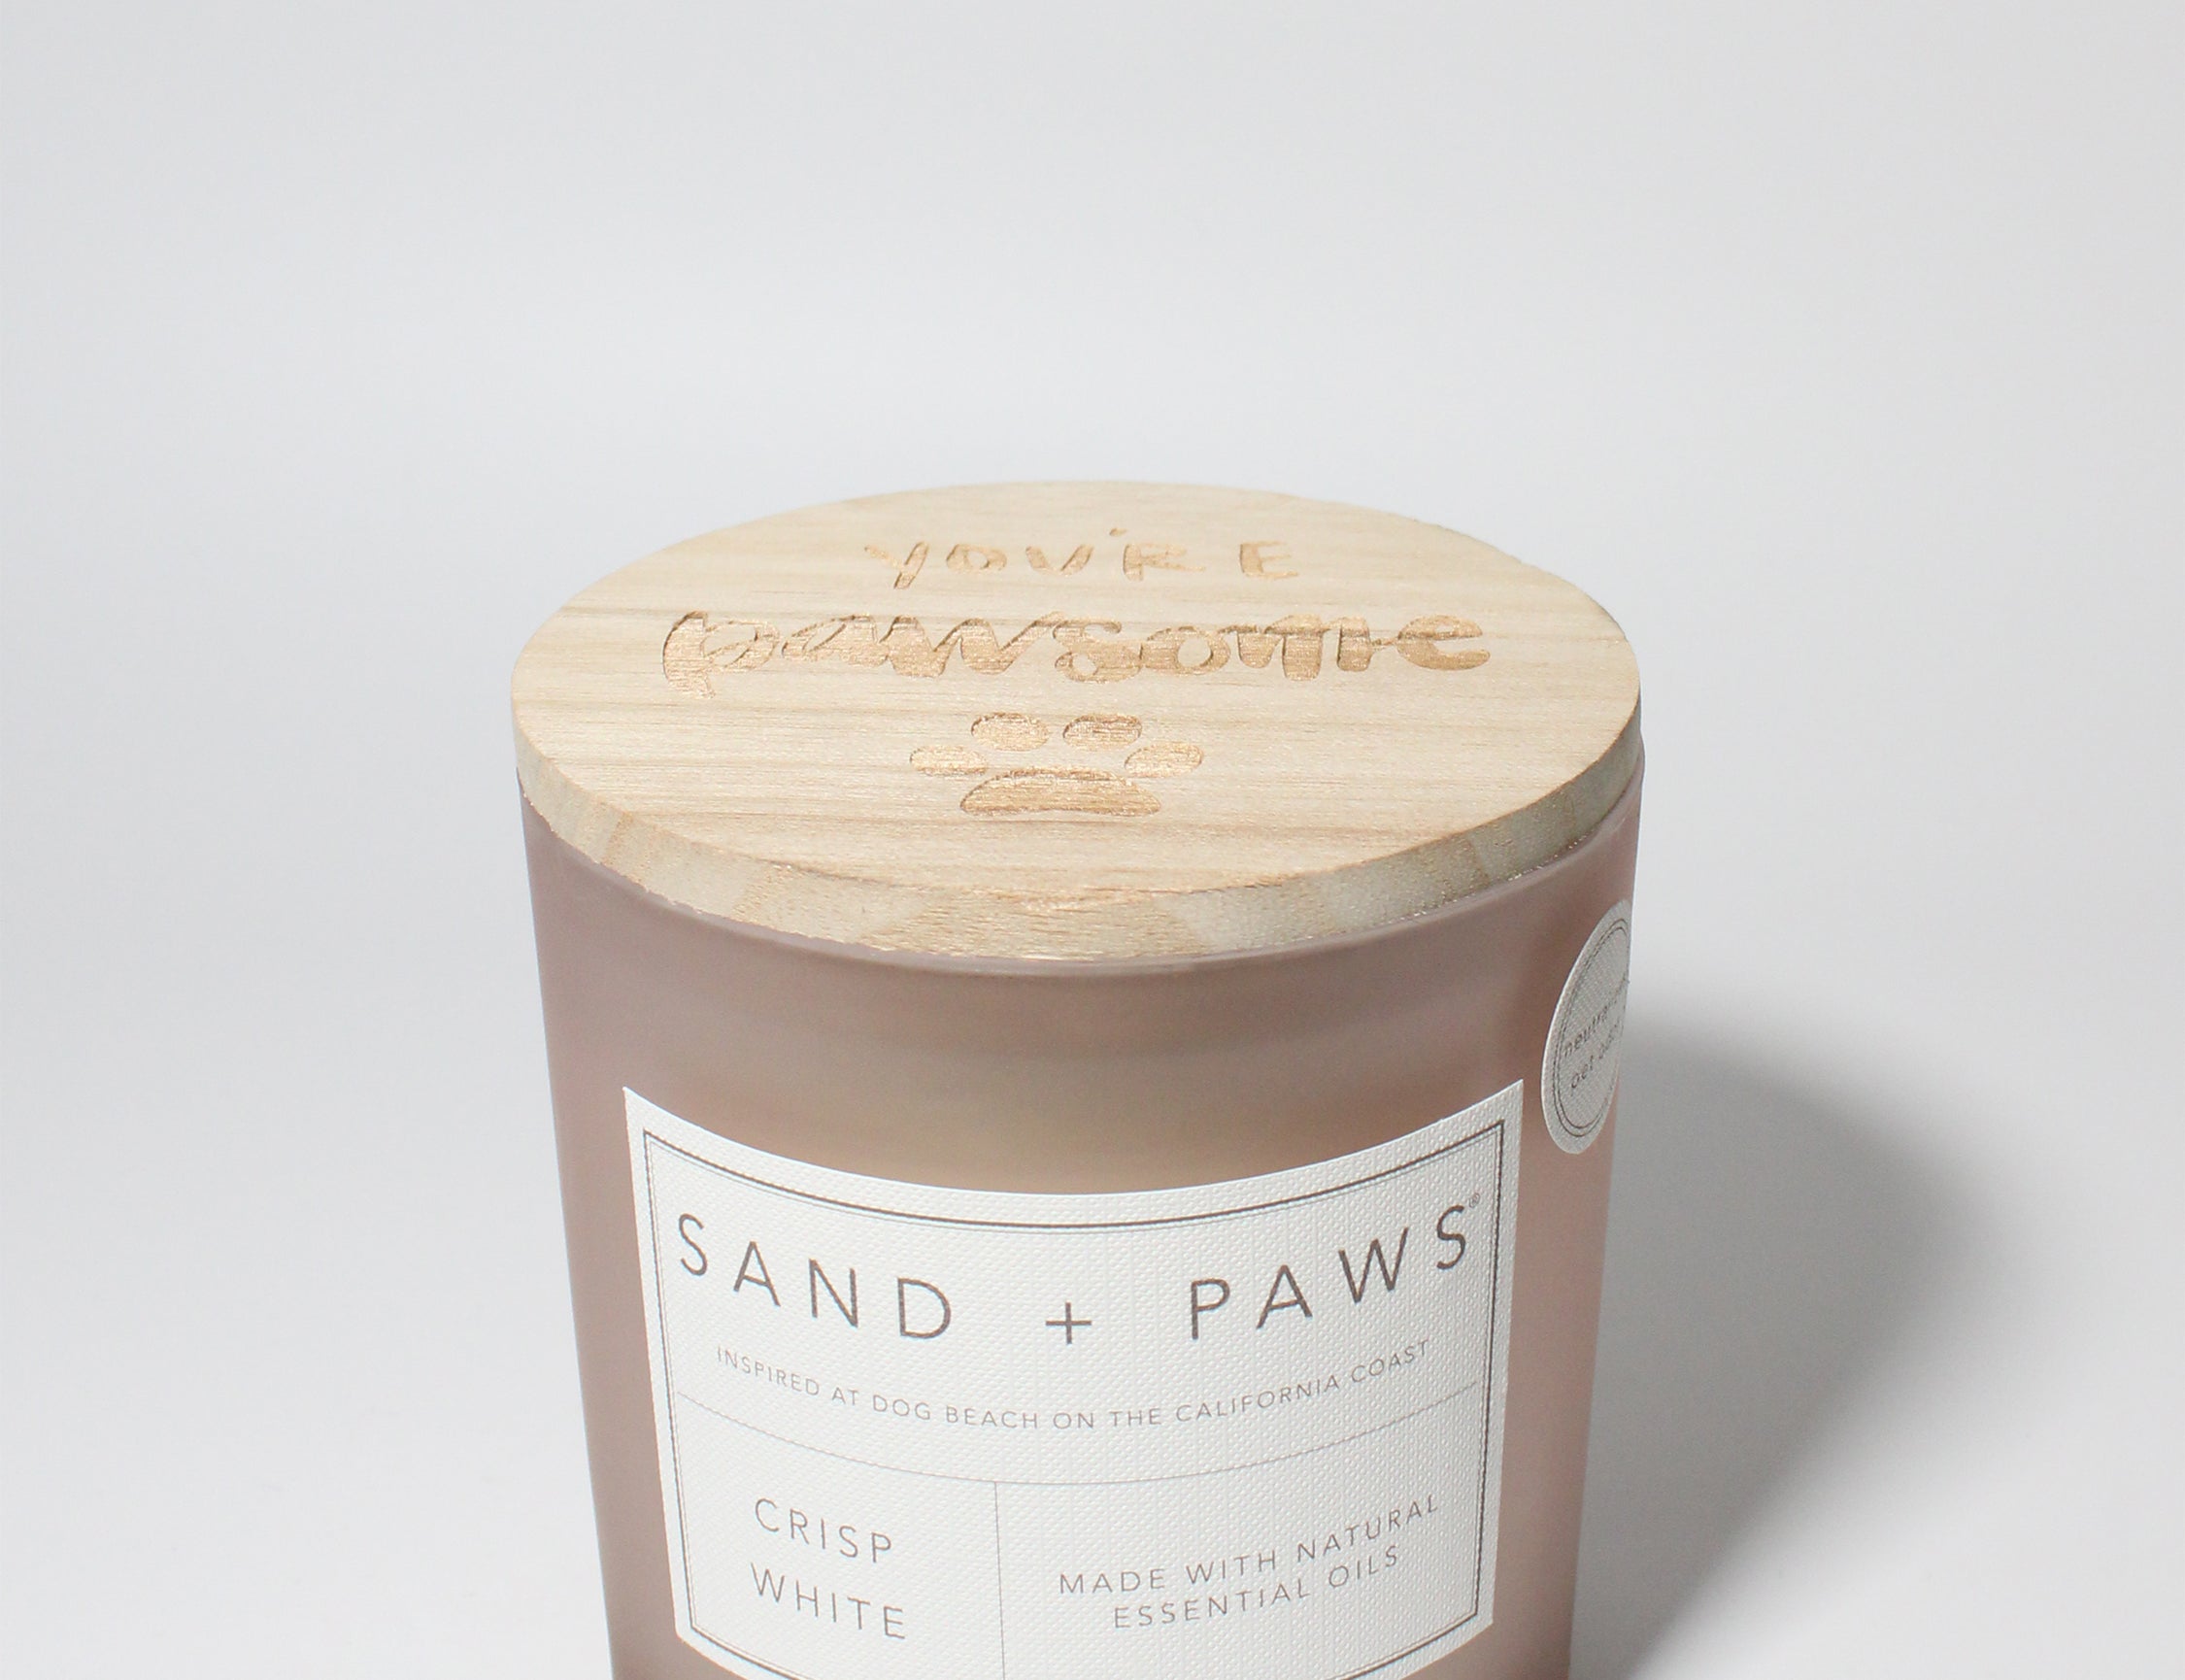 Sand + Paws Crisp White 21 oz scented candle Blush vessel with You're Pawsome wood lid